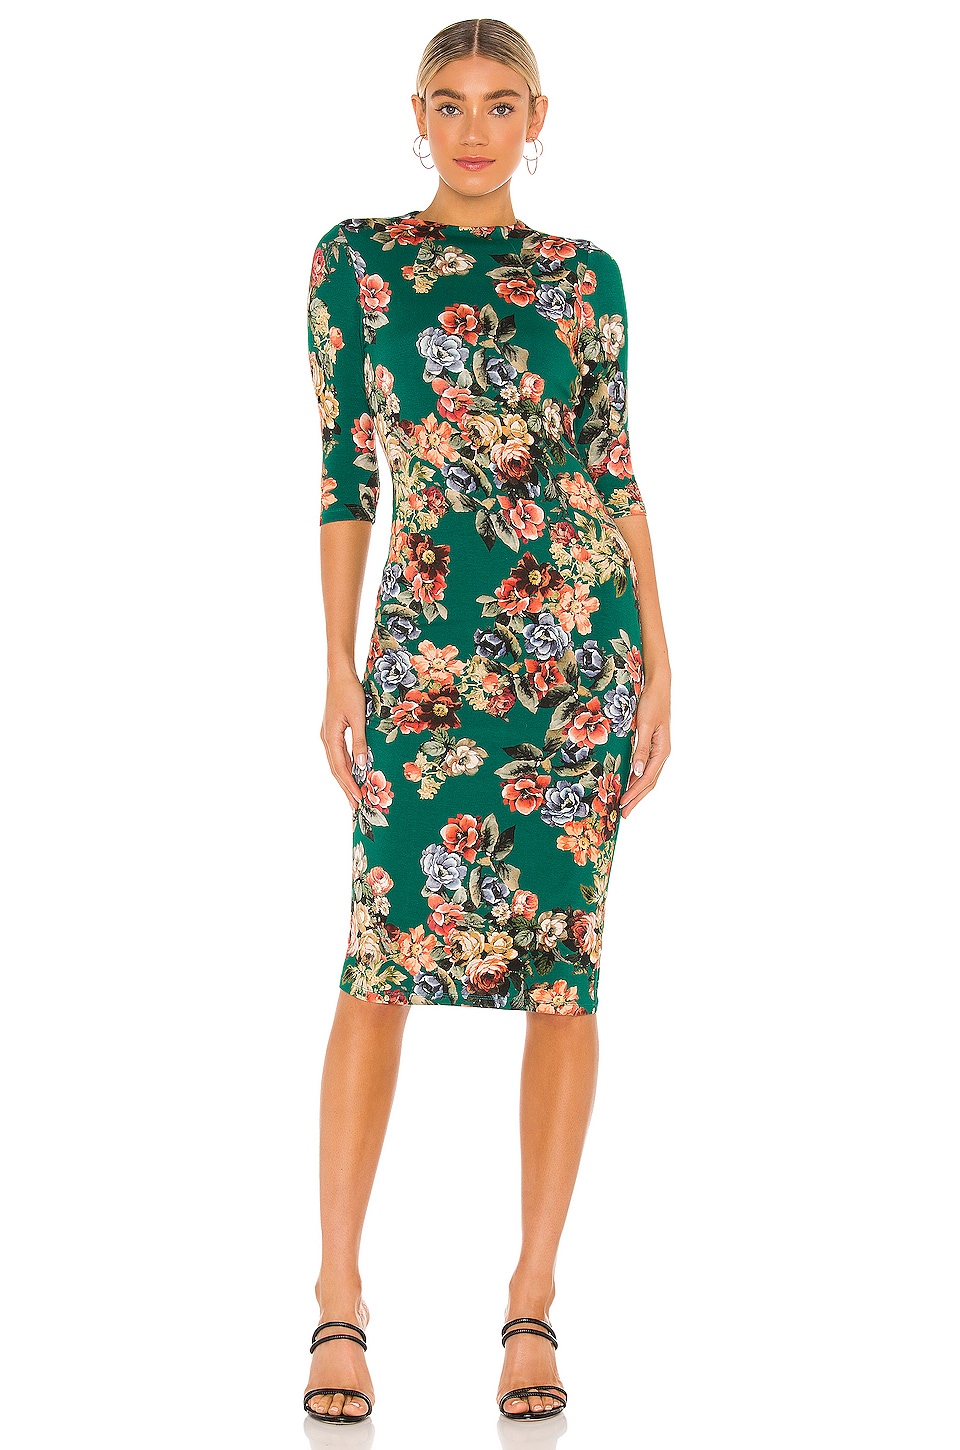 Buy > alice and olivia teal dress > in stock